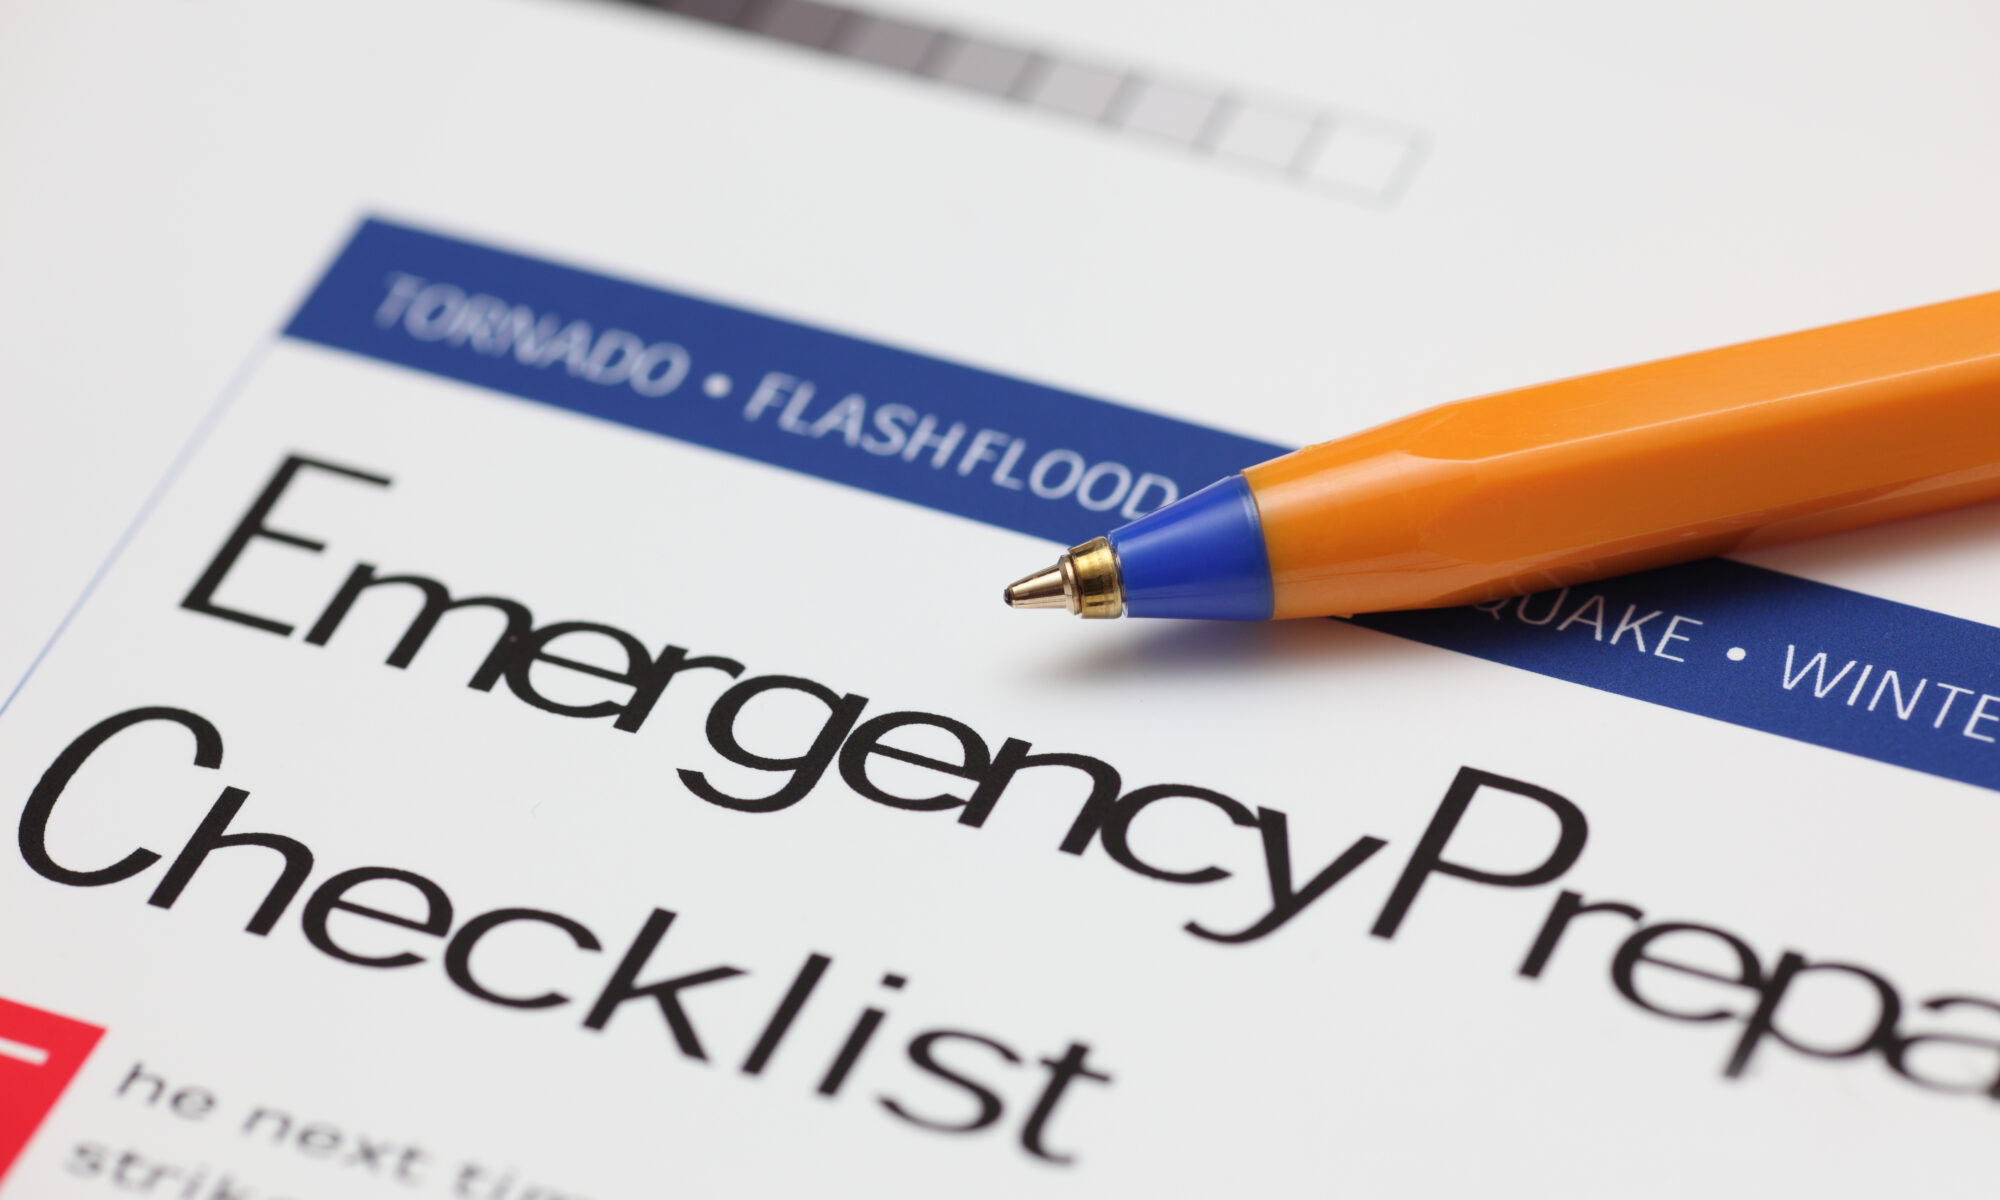 Emergency,Checklist,And,Ballpoint,Pen.,Close up.